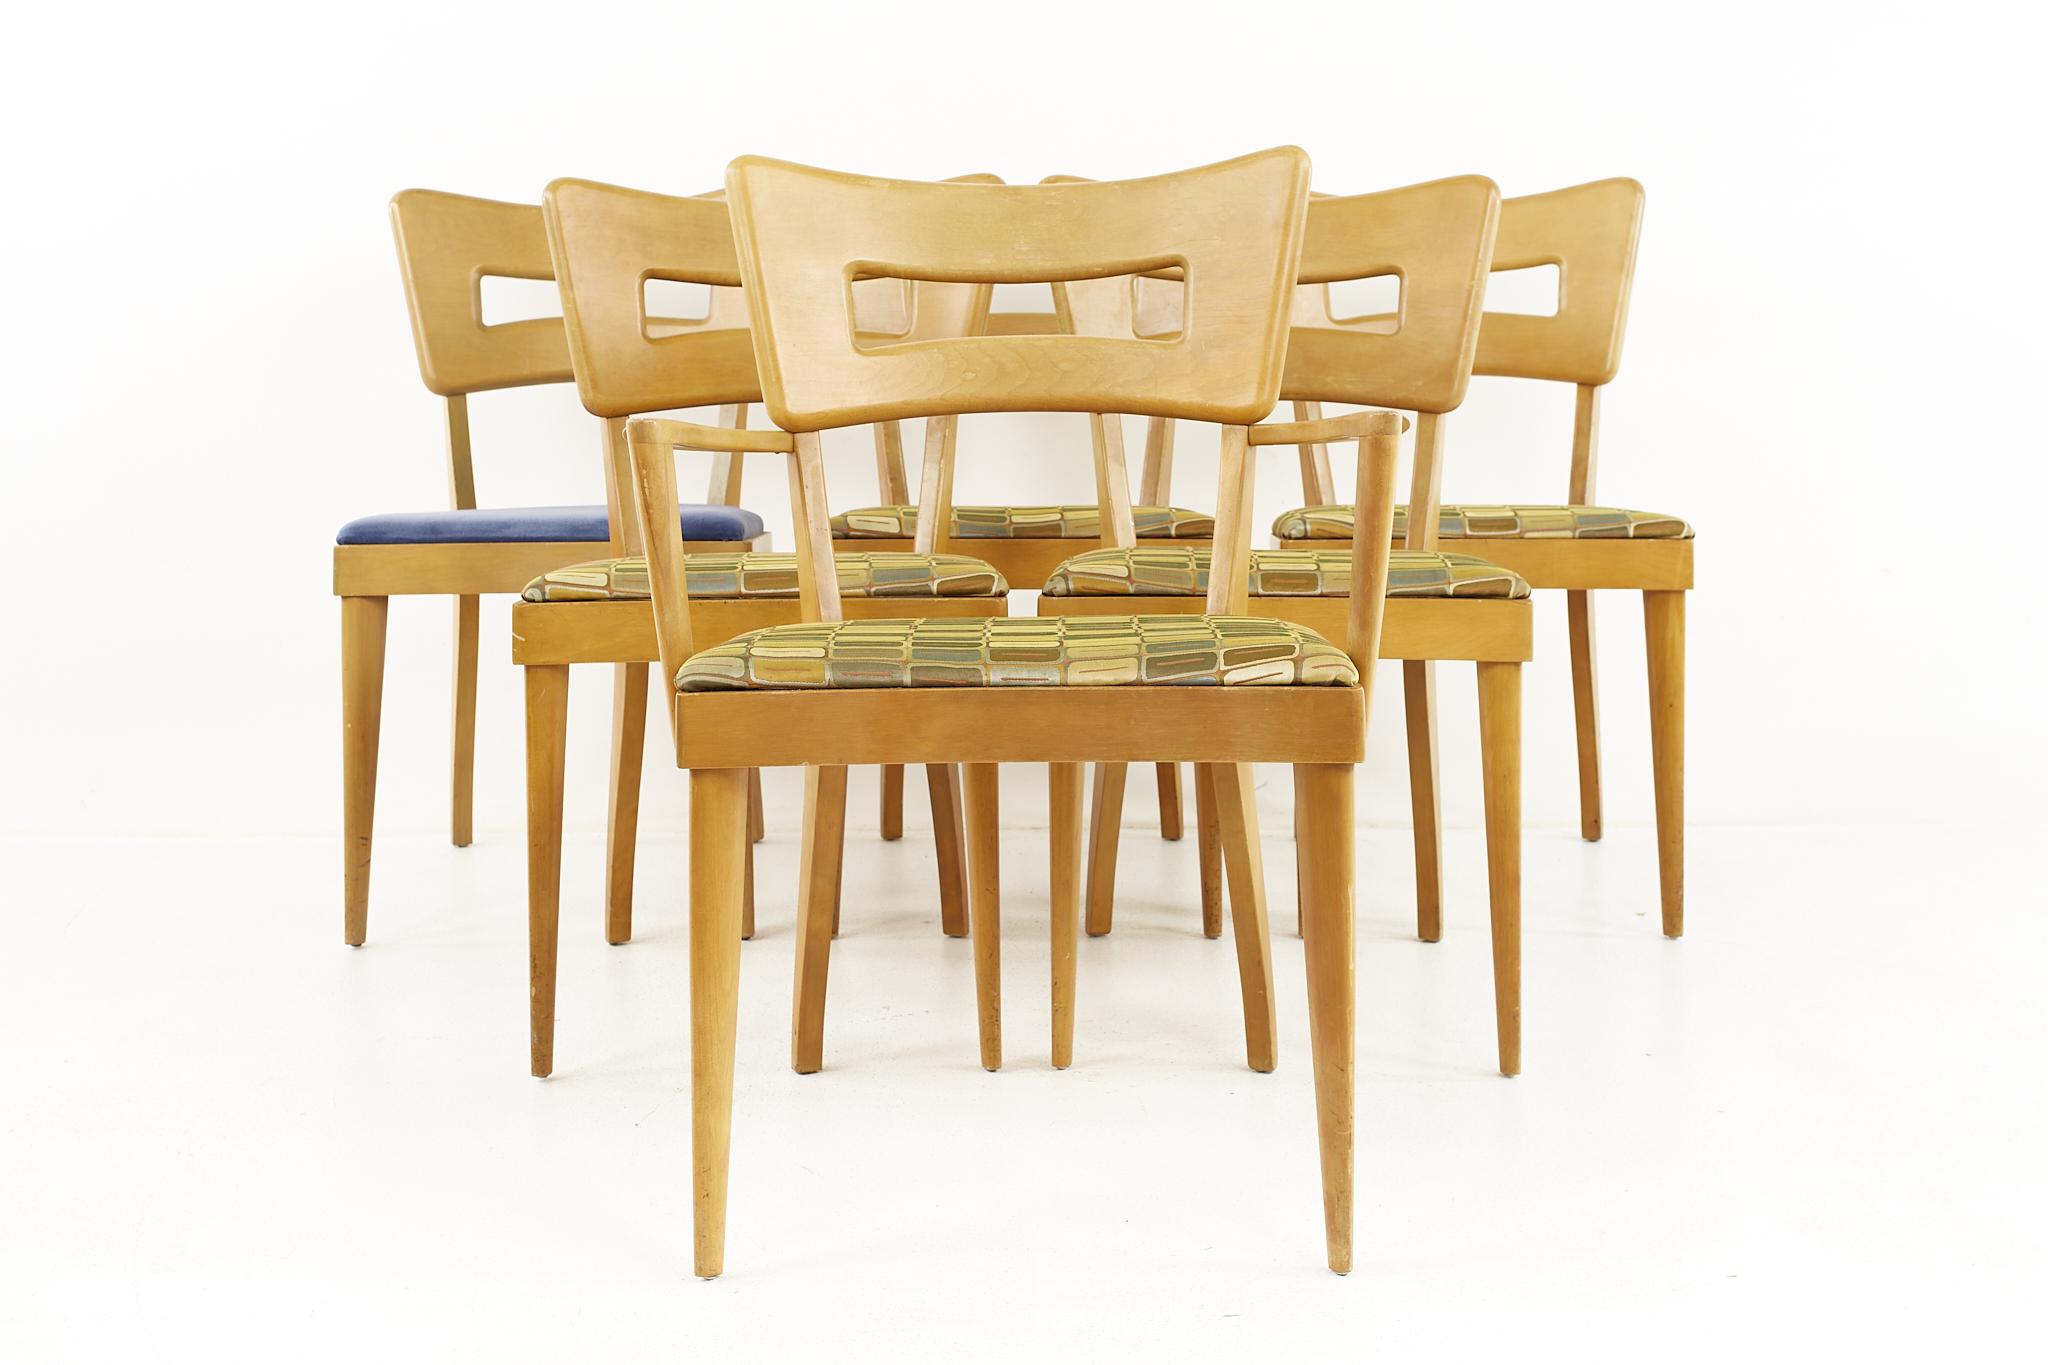 Heywood Wakefield mid century dog bone dining chairs - Set of 6

The captains chair measures: 25.5 wide x 18.5 deep x 34 high, with a seat height of 18.5 inches and an arm height of 25 inches
The side chairs measure: 24 wide x 18 deep x 33 high,